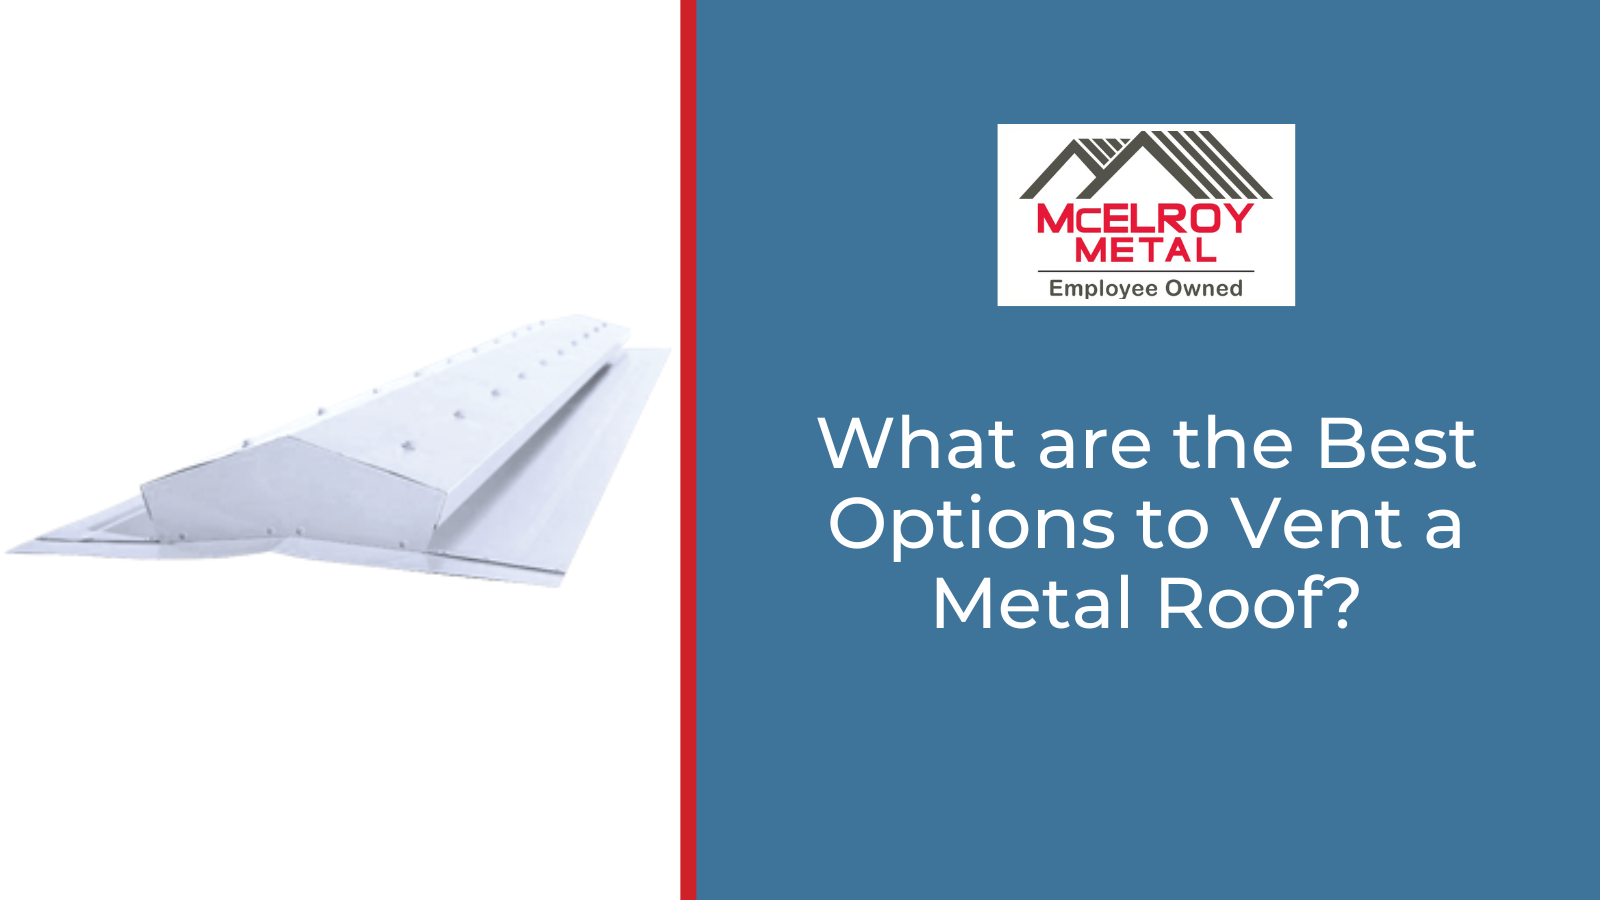 What are the Best Options to Vent a Metal Roof?